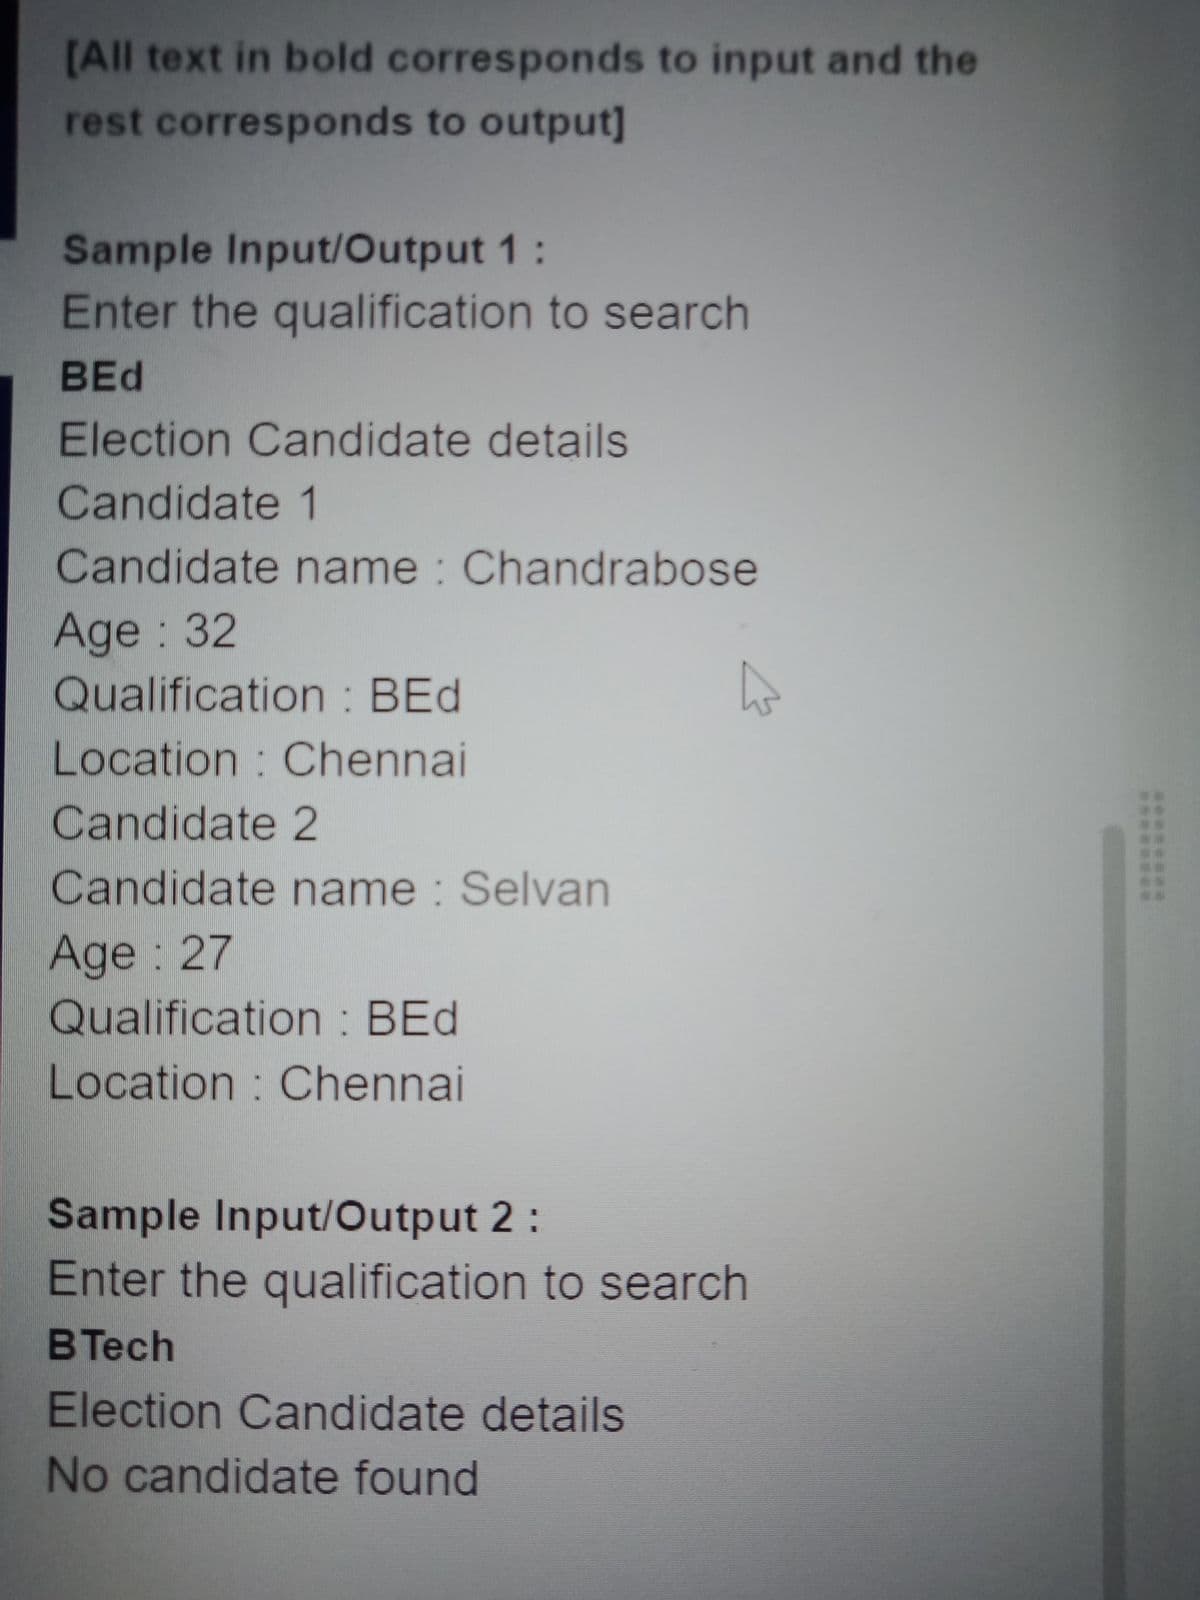 [All text in bold corresponds to input and the
rest corresponds to output]
Sample Input/Output 1:
Enter the qualification to search
BEd
Election Candidate details
Candidate 1
Candidate name : Chandrabose
Age: 32
Qualification : BEd
Location : Chennai
Candidate 2
Candidate name : Selvan
Age: 27
Qualification : BEd
Location : Chennai
Sample Input/Output 2:
Enter the qualification to search
BTech
Election Candidate details
No candidate found
